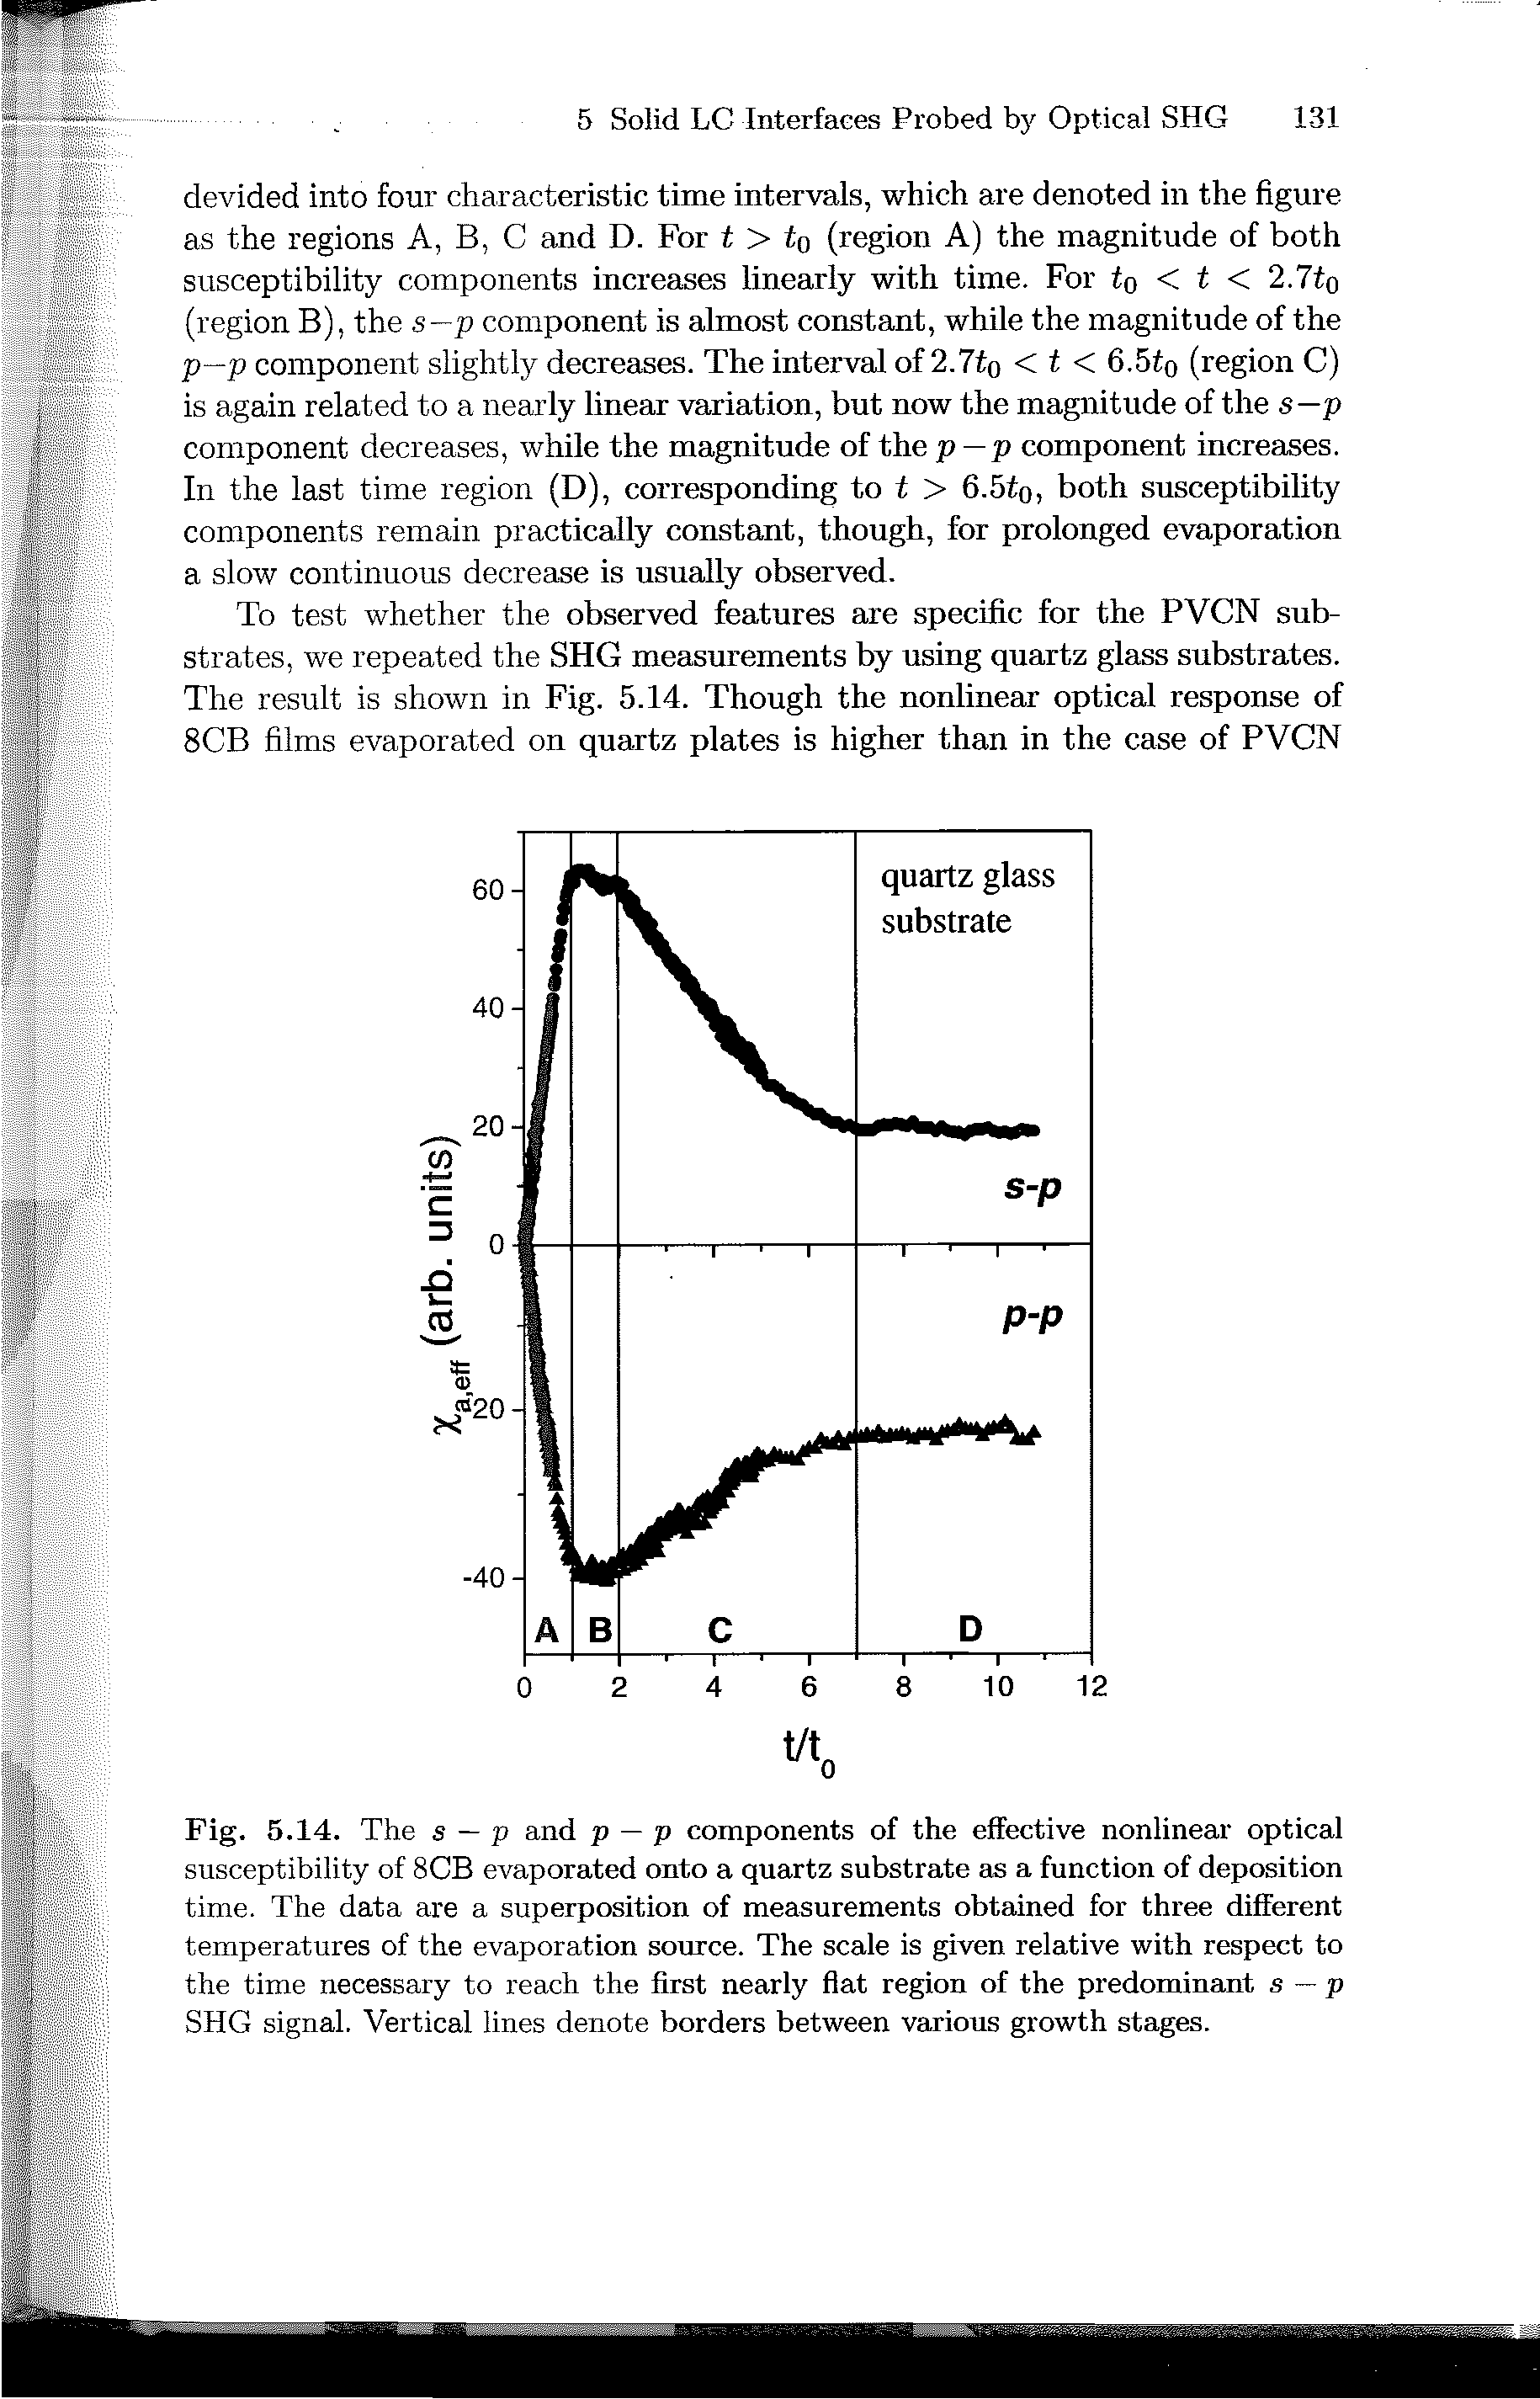 Fig. 5.14. The s — p and p — p components of the effective nonlinear optical susceptibility of 8CB evaporated onto a quartz substrate as a function of deposition time. The data are a superposition of measurements obtained for three different temperatures of the evaporation source. The scale is given relative with respect to the time necessary to reach the first nearly flat region of the predominant s — p SHG signal. Vertical lines denote borders between various growth stages.